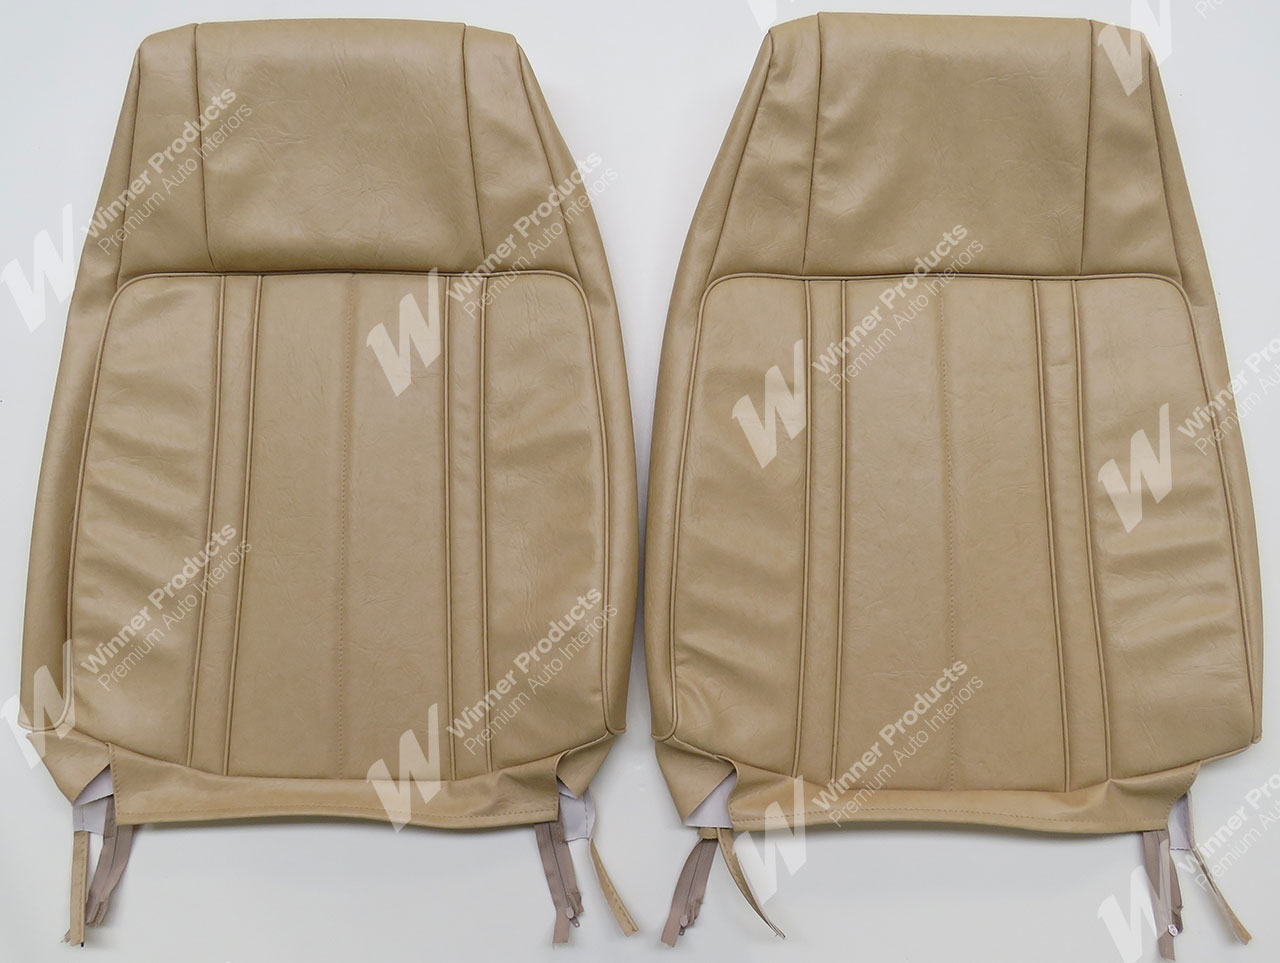 Ford GT XB GT Sedan C Chamois Seat Covers (Image 2 of 7)